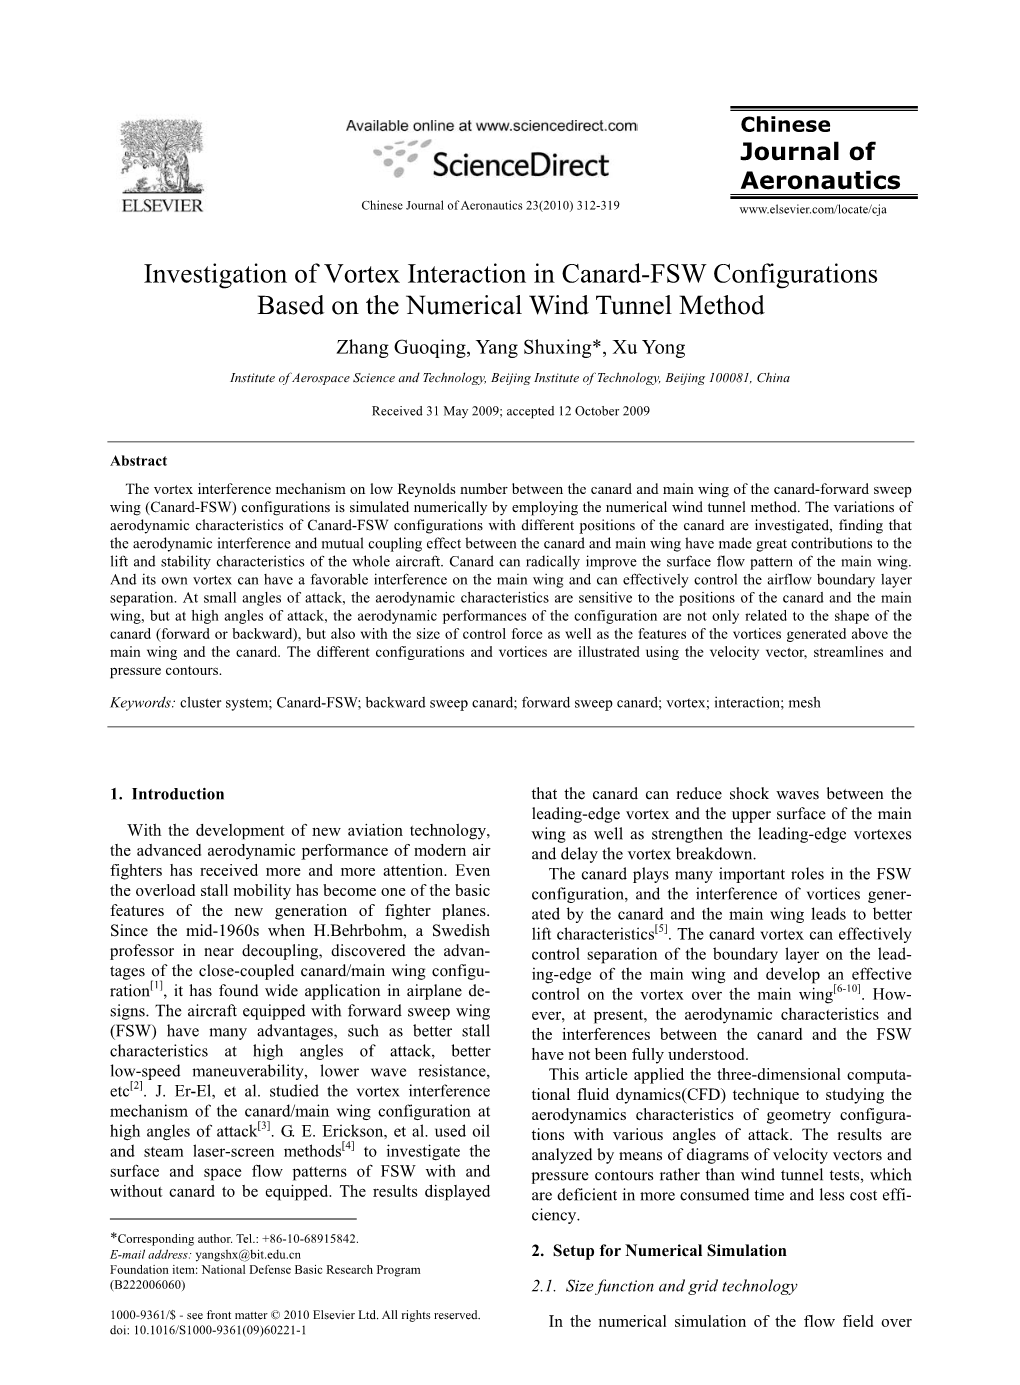 Investigation of Vortex Interaction in Canard-FSW Configurations Based on the Numerical Wind Tunnel Method